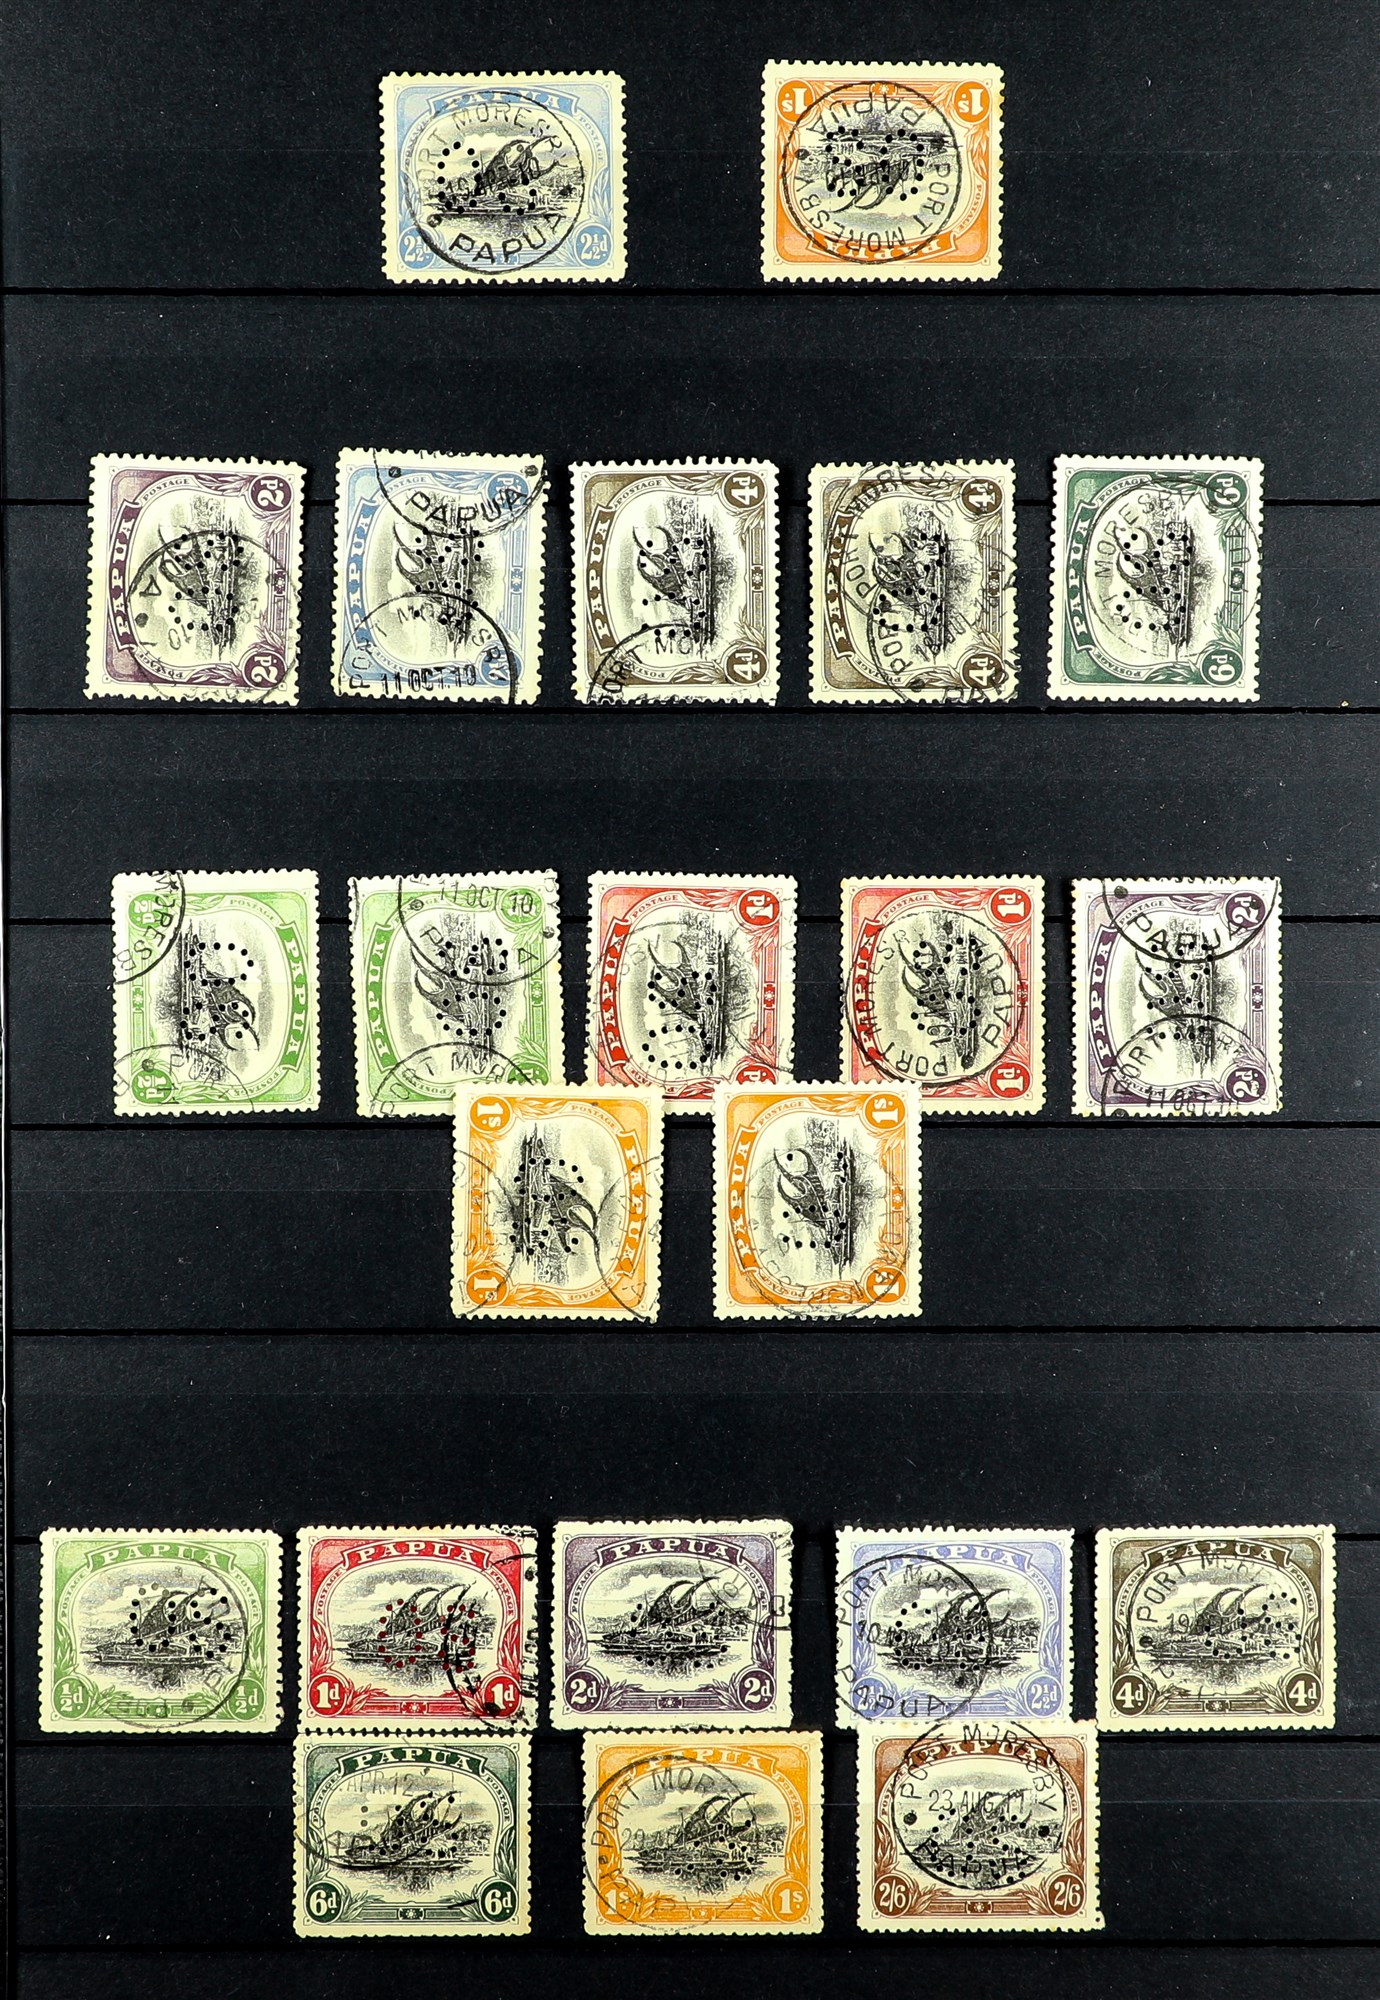 PAPUA OFFICIALS 1908 - 1932 COLLECTION of used stamps on protective pages, includes sets, high